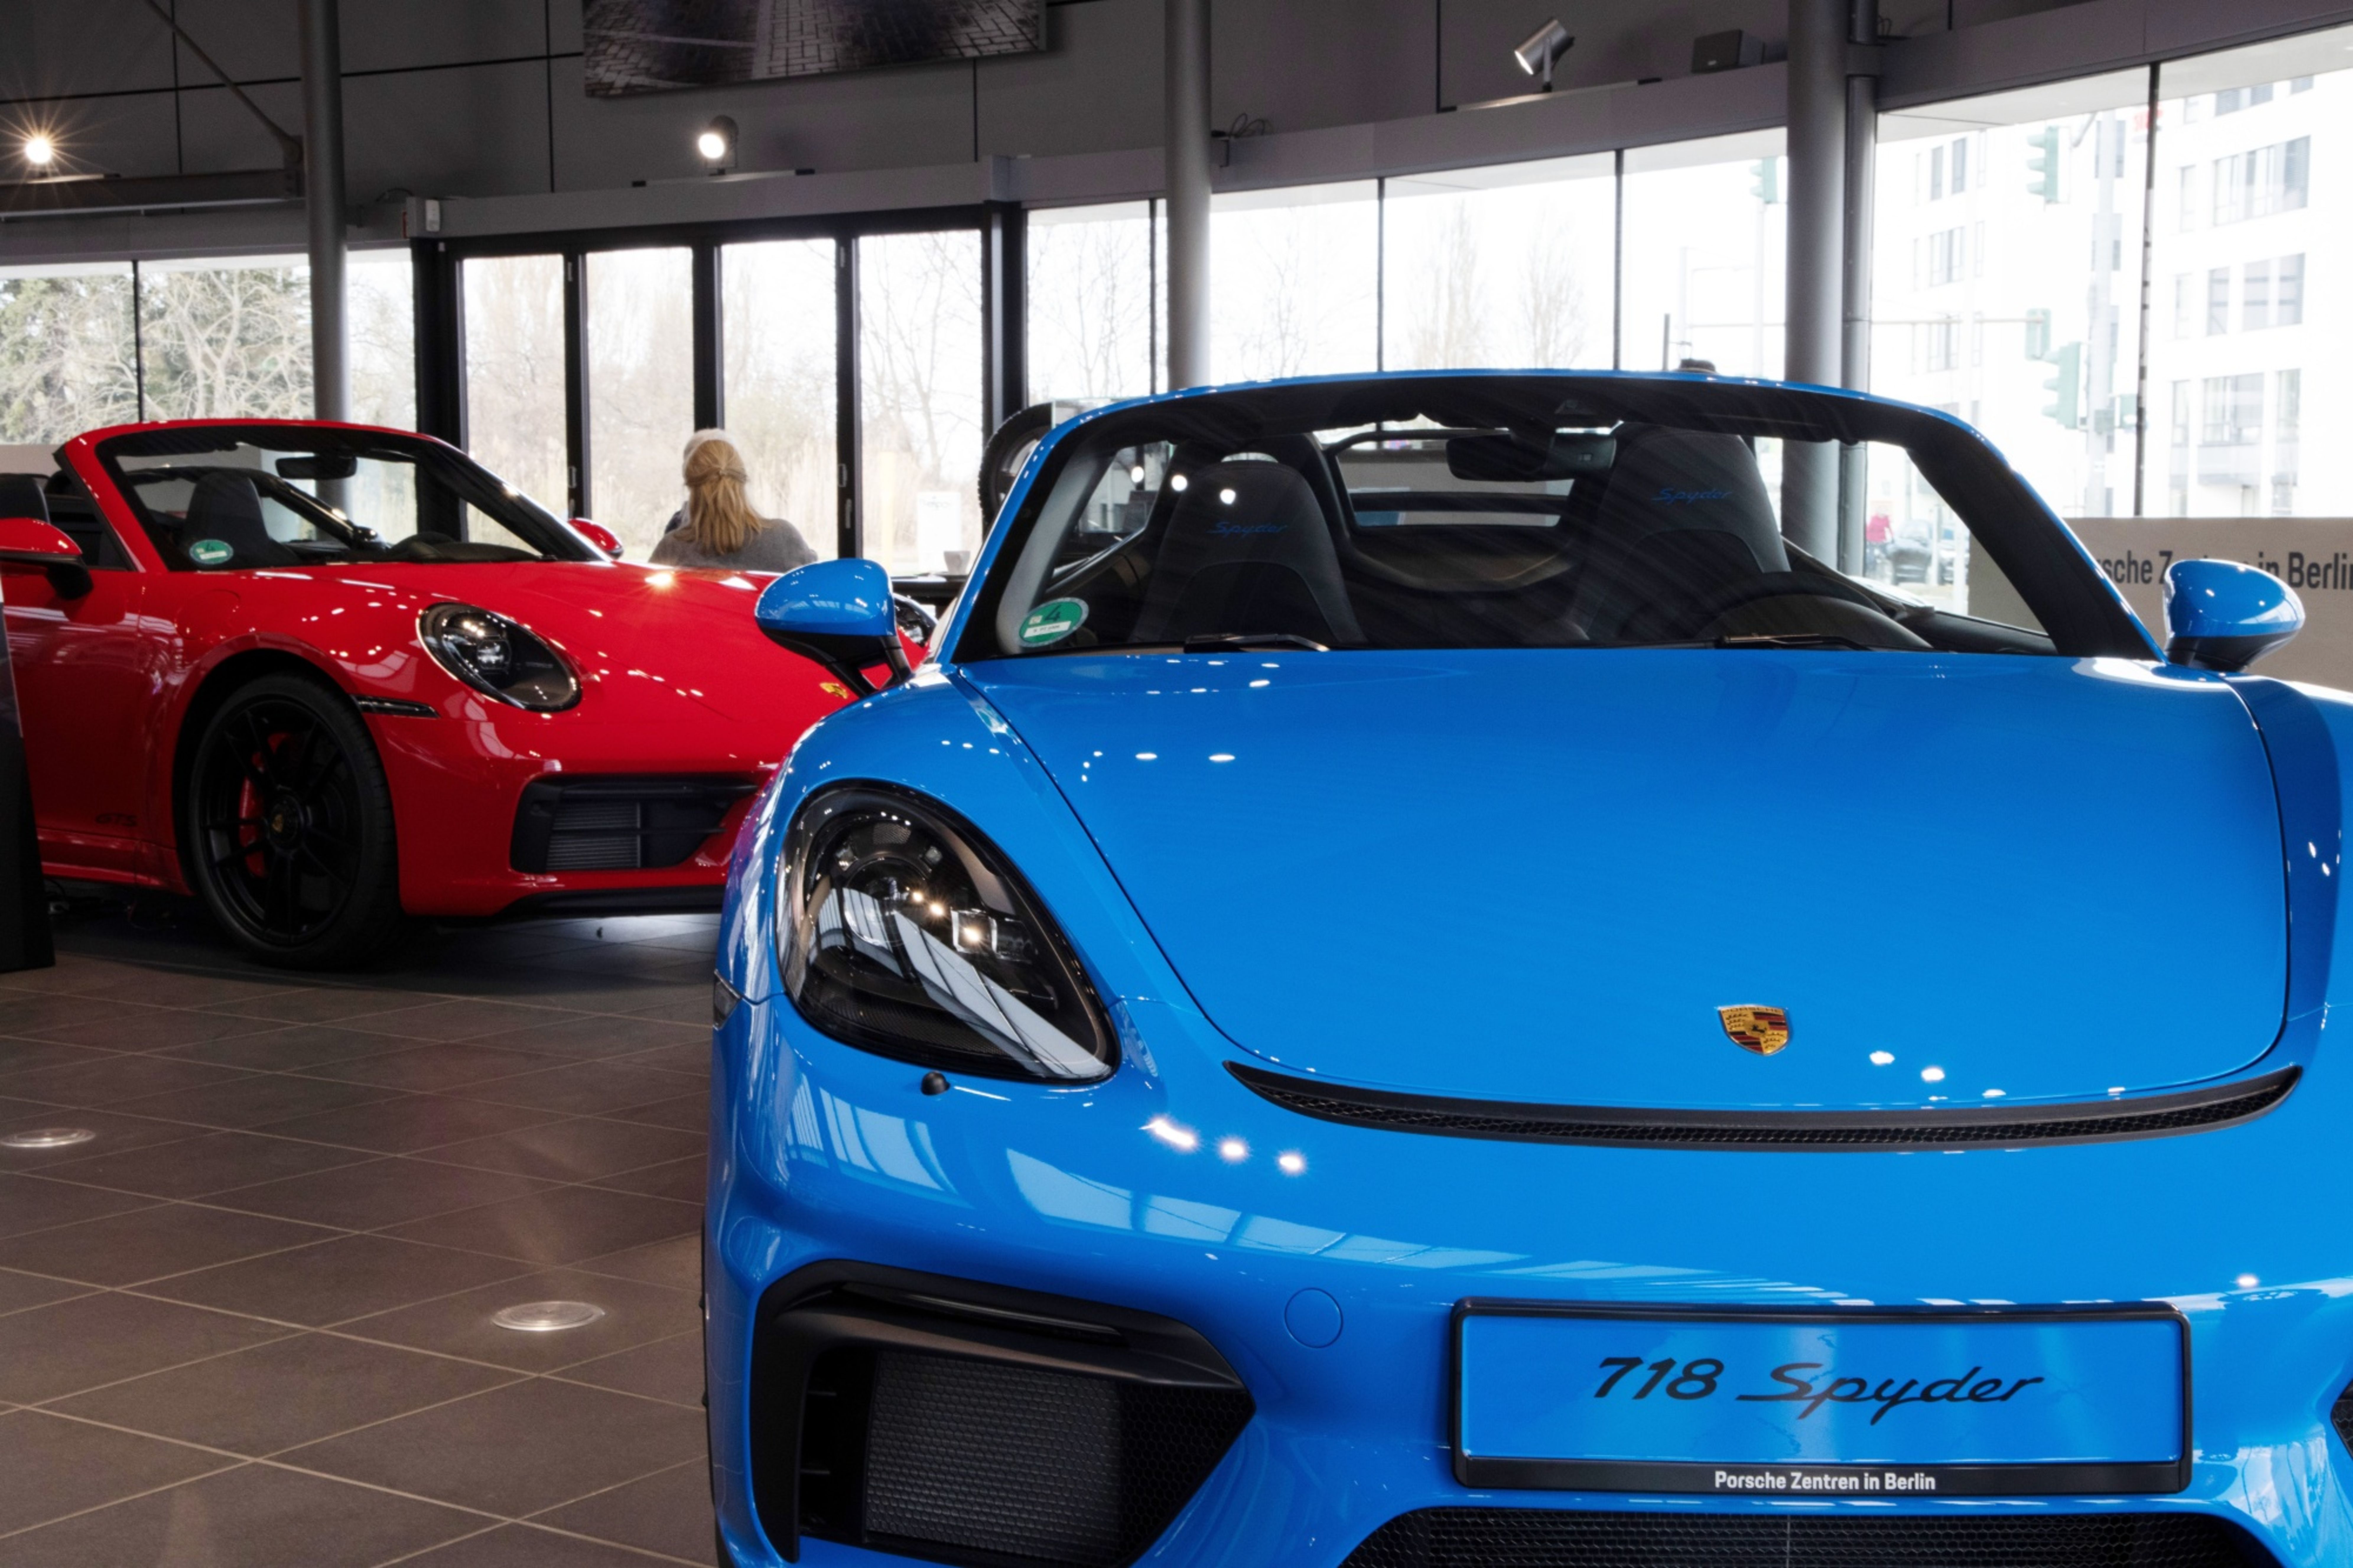 A Porsche 718 Spyder automobile at a Porsche SE showroom in Berlin, Germany, on Tuesday, March 29, 2022. Porsche, which reports reports final year earnings today, delivered 301,915 vehicles to customers in 2021, an 11% jump from 2020 and the first time it has surpassed the 300,000 mark.